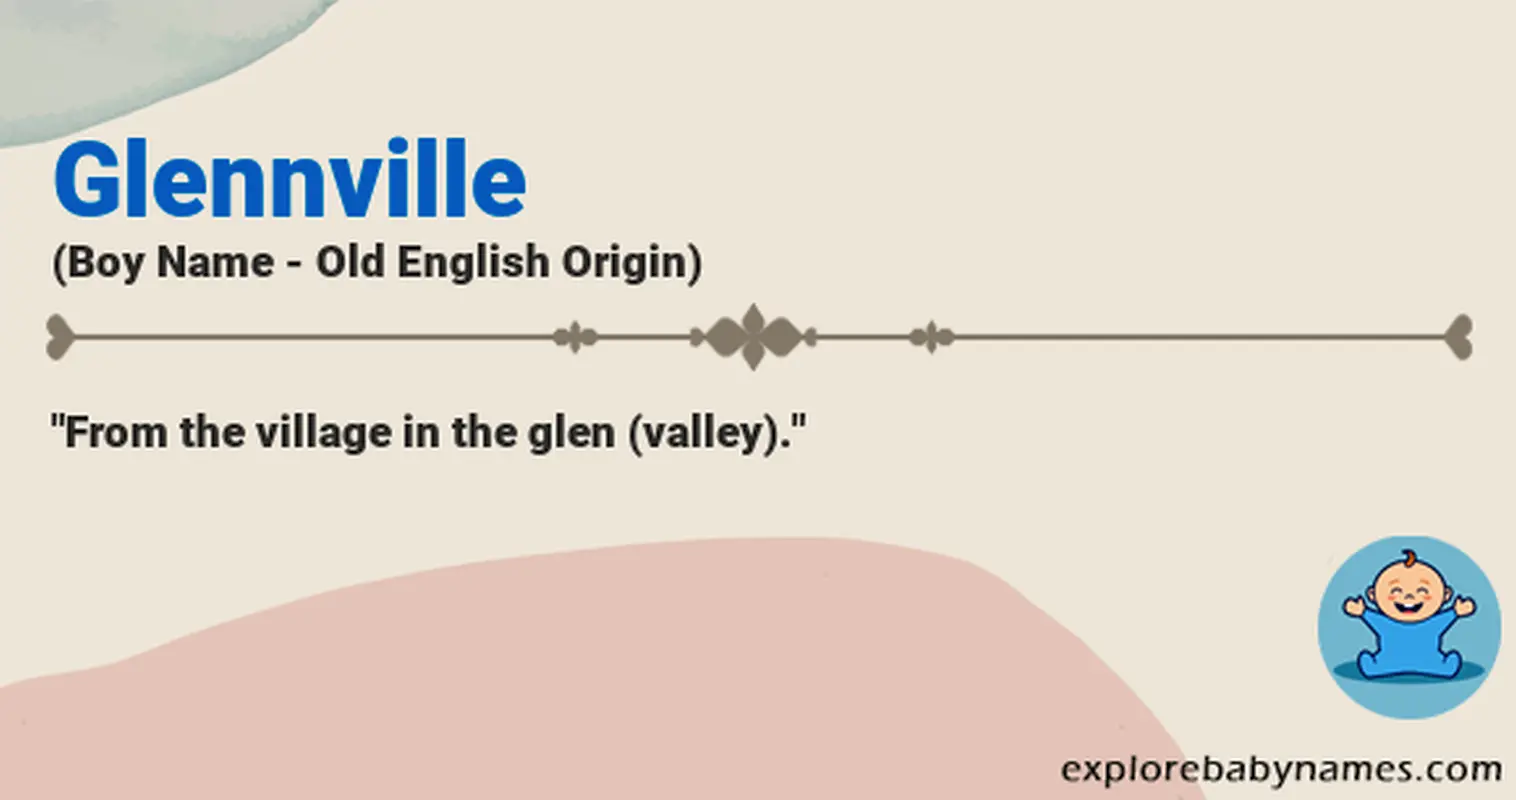 Meaning of Glennville